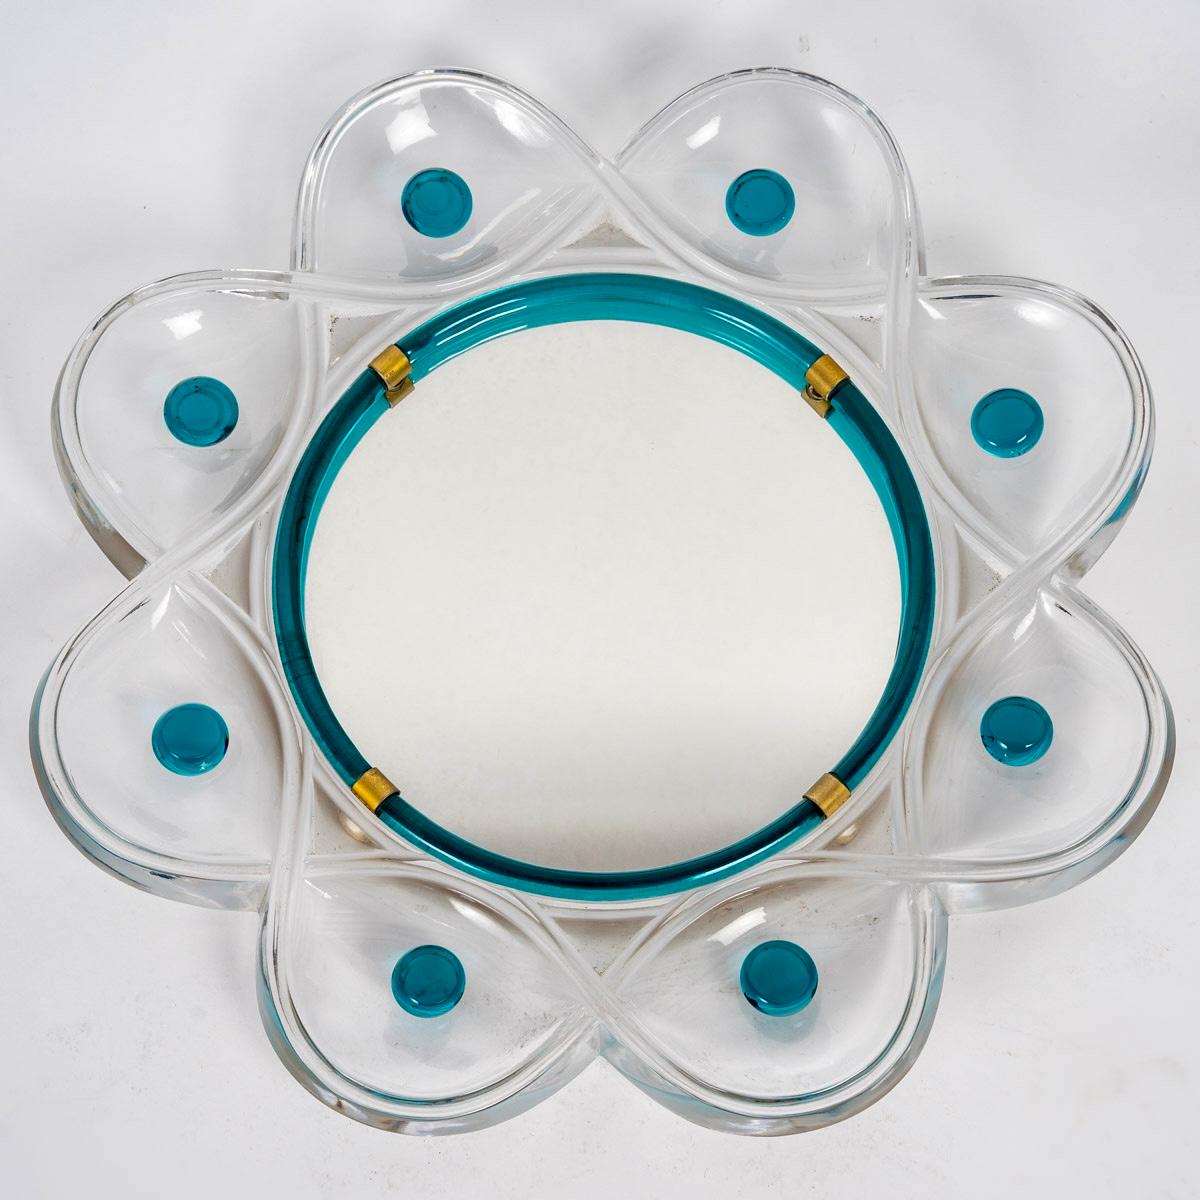 Mirror “Floride” (Florida) made in clear and turquoise crystal by Marc Lalique created in 1950.
Engraved signature. 

Perfect condition. Very beautiful model.

diameter: 27.5 cm